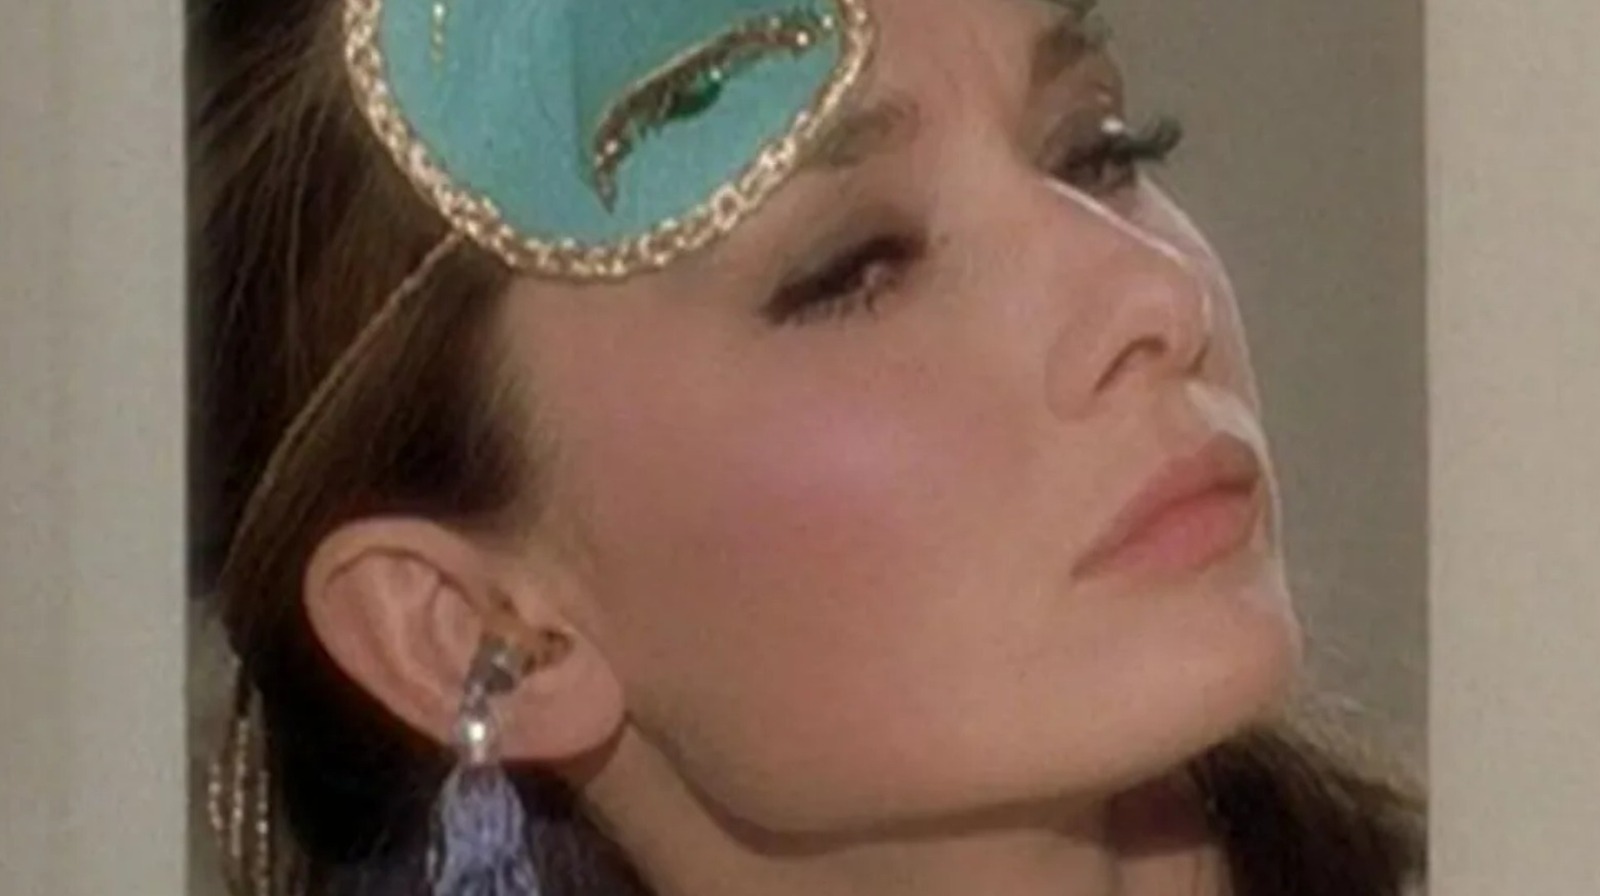 Have Your Audrey Hepburn Moment With An Actual Breakfast At Tiffany's